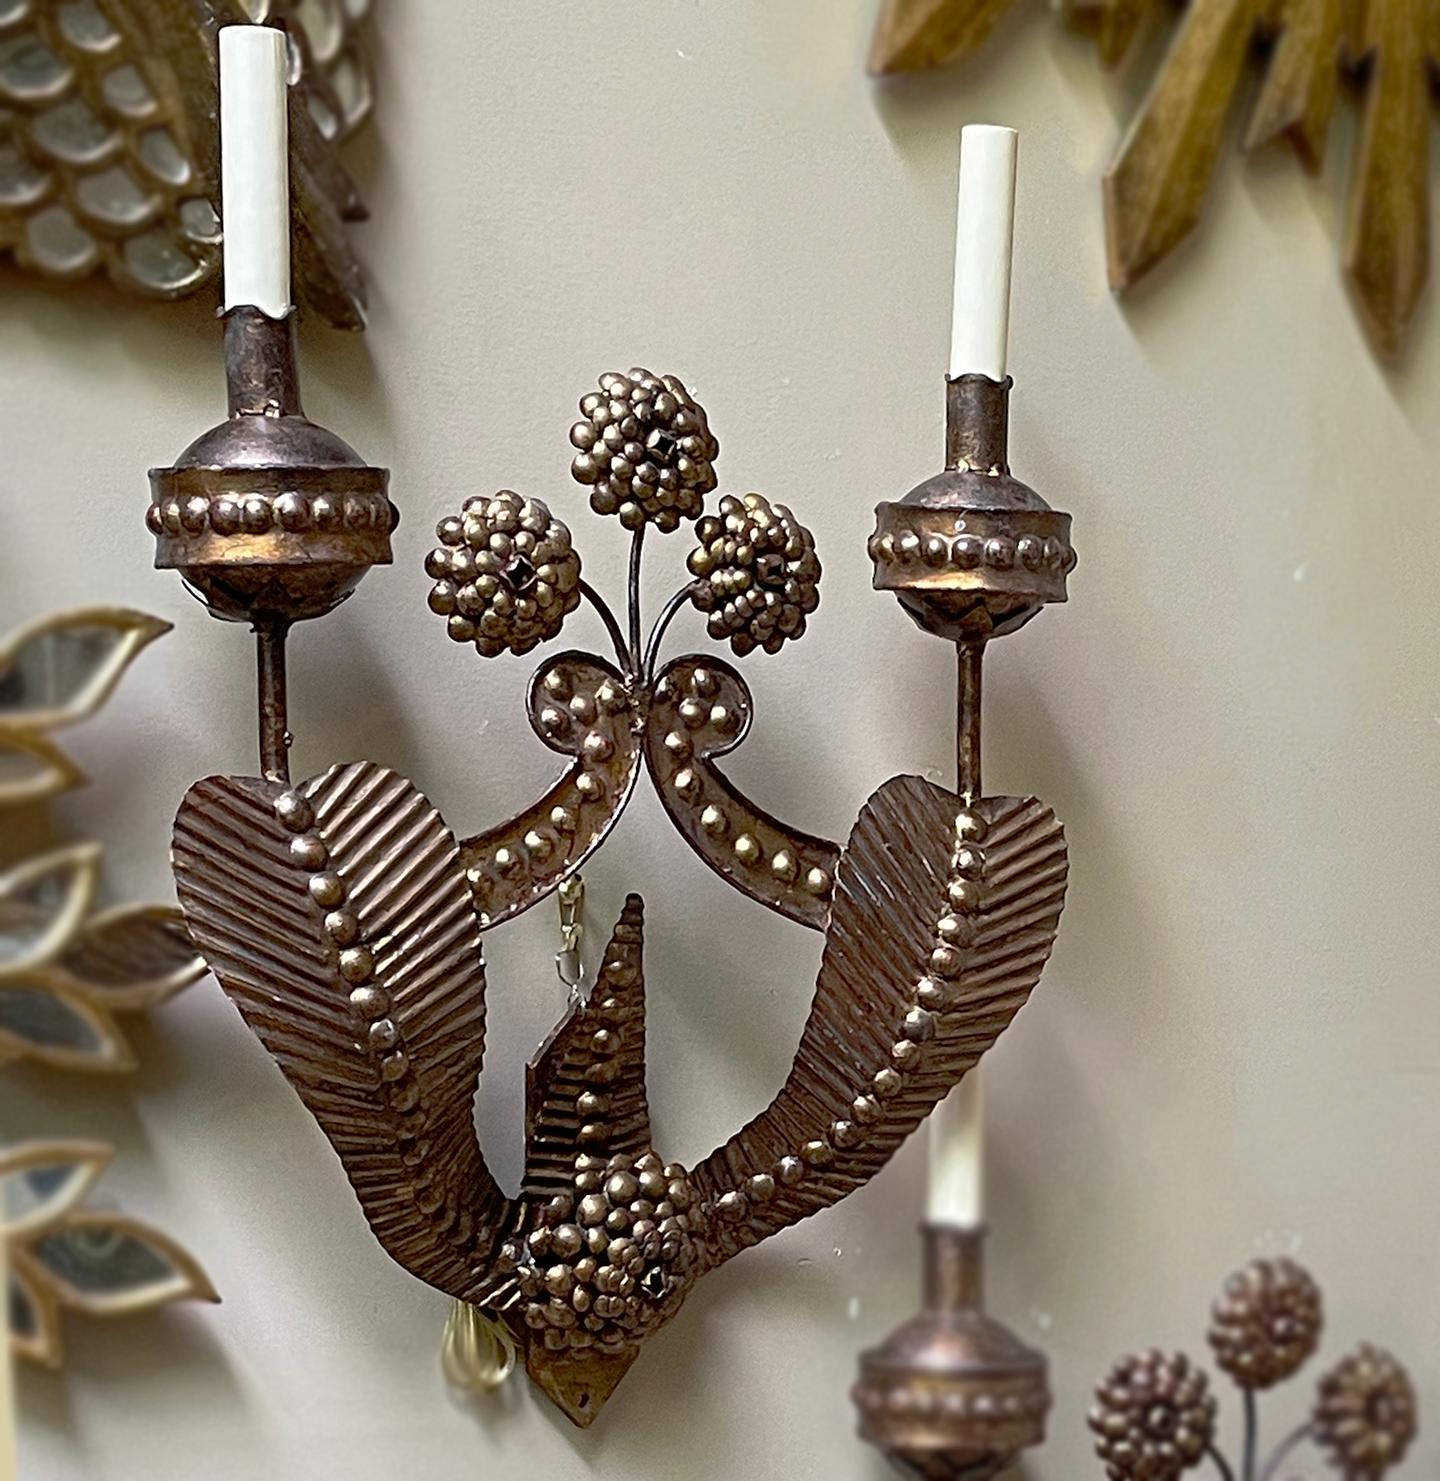 A pair of circa 1940's Italian gilt iron double light sconces with flower detail.

Measurements:
Height: 21